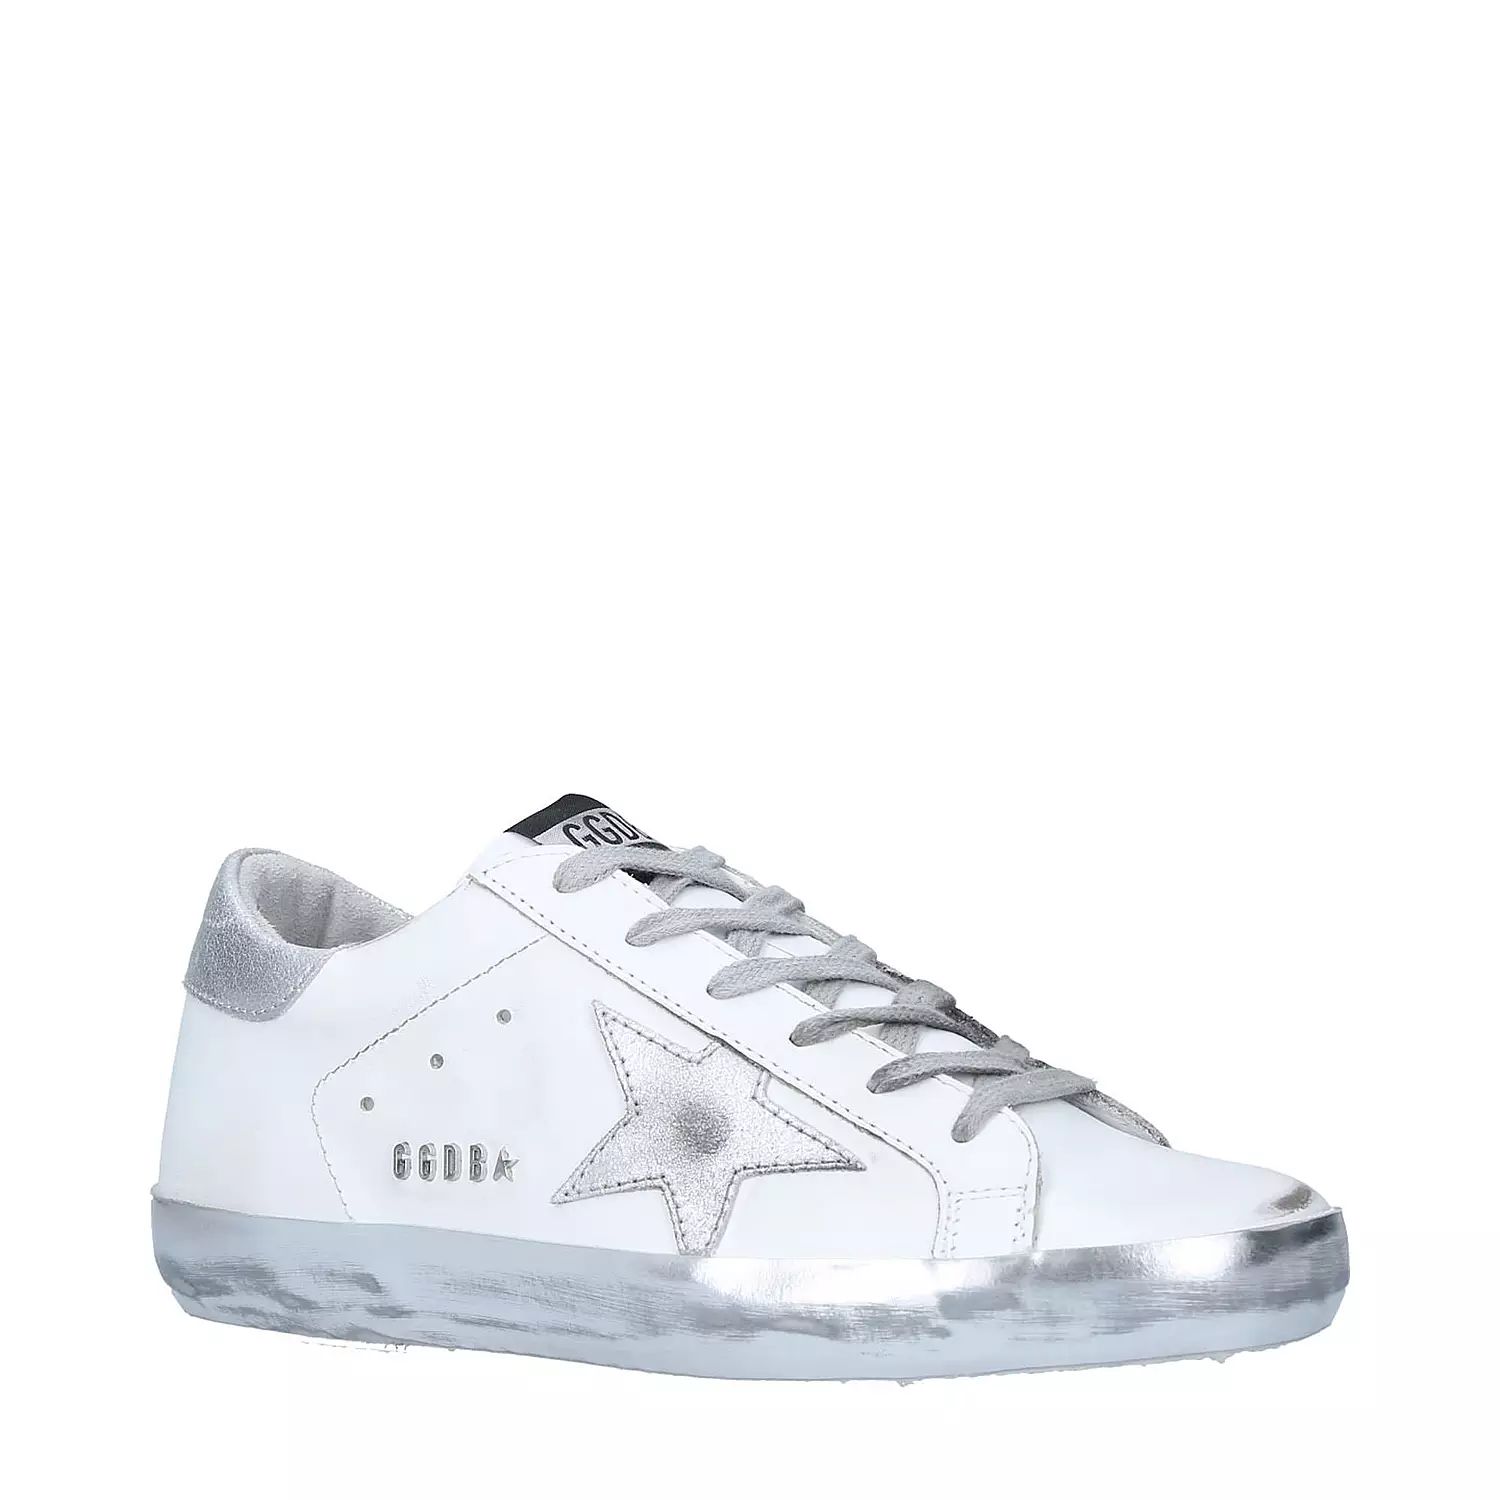 GOLDEN GOOSE Superstar 80185 Trainers - White | Brown Thomas (IE)